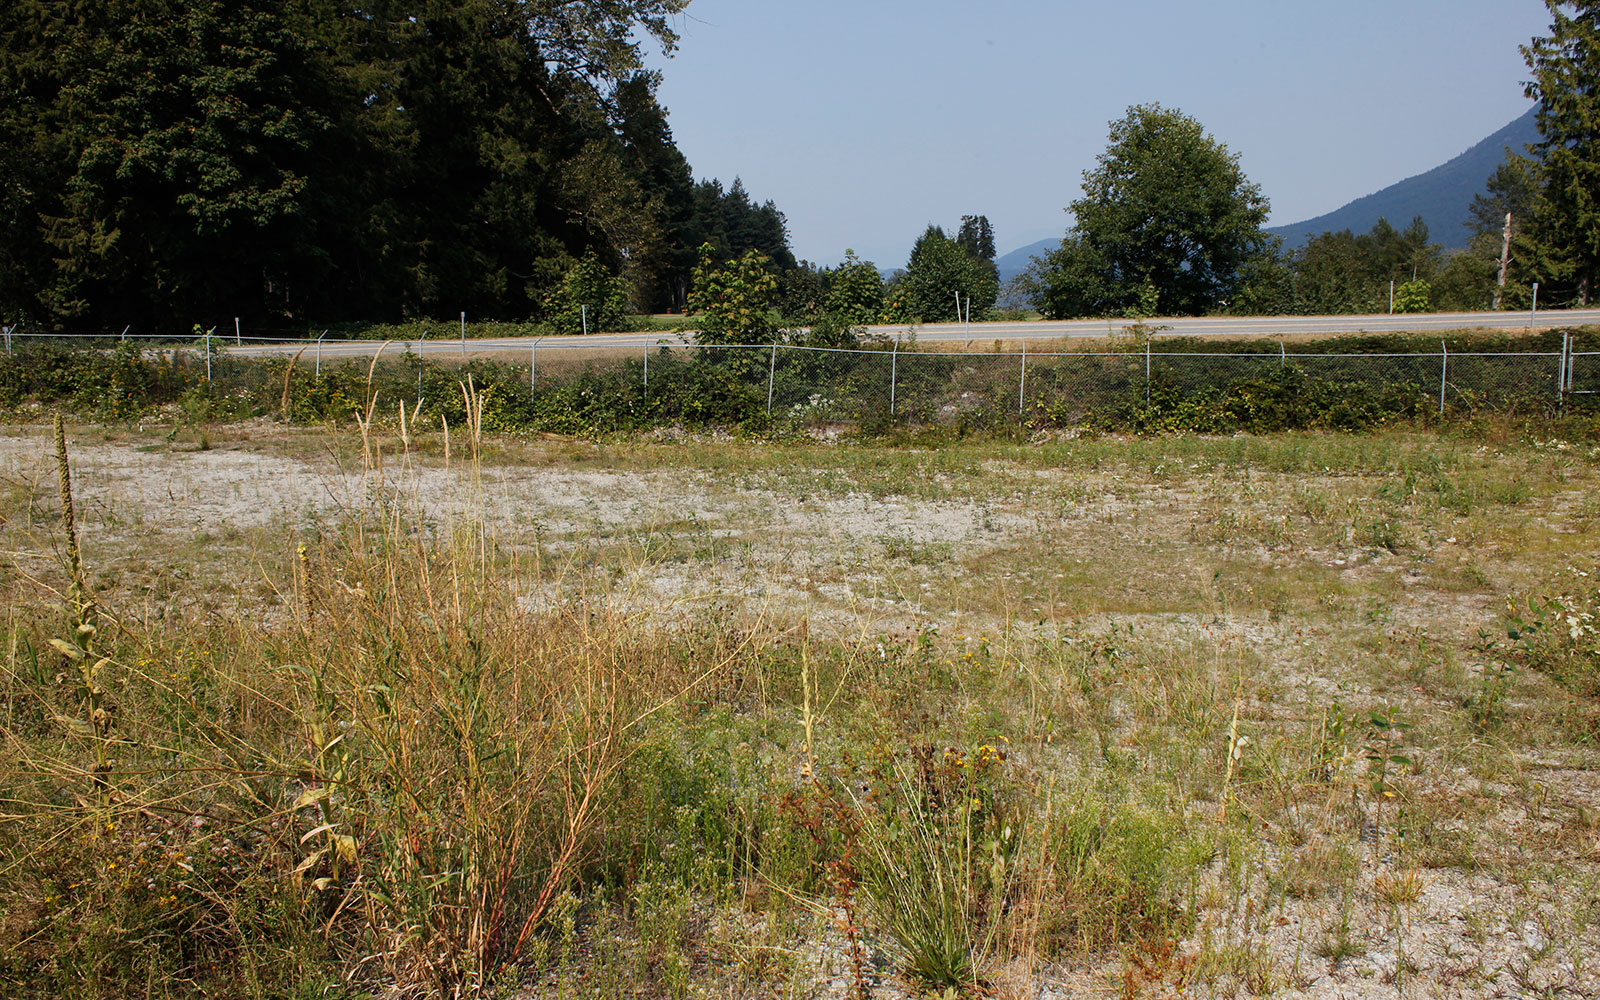 A picture of a field. There is a wire fence, a cement road, and some trees in the background.